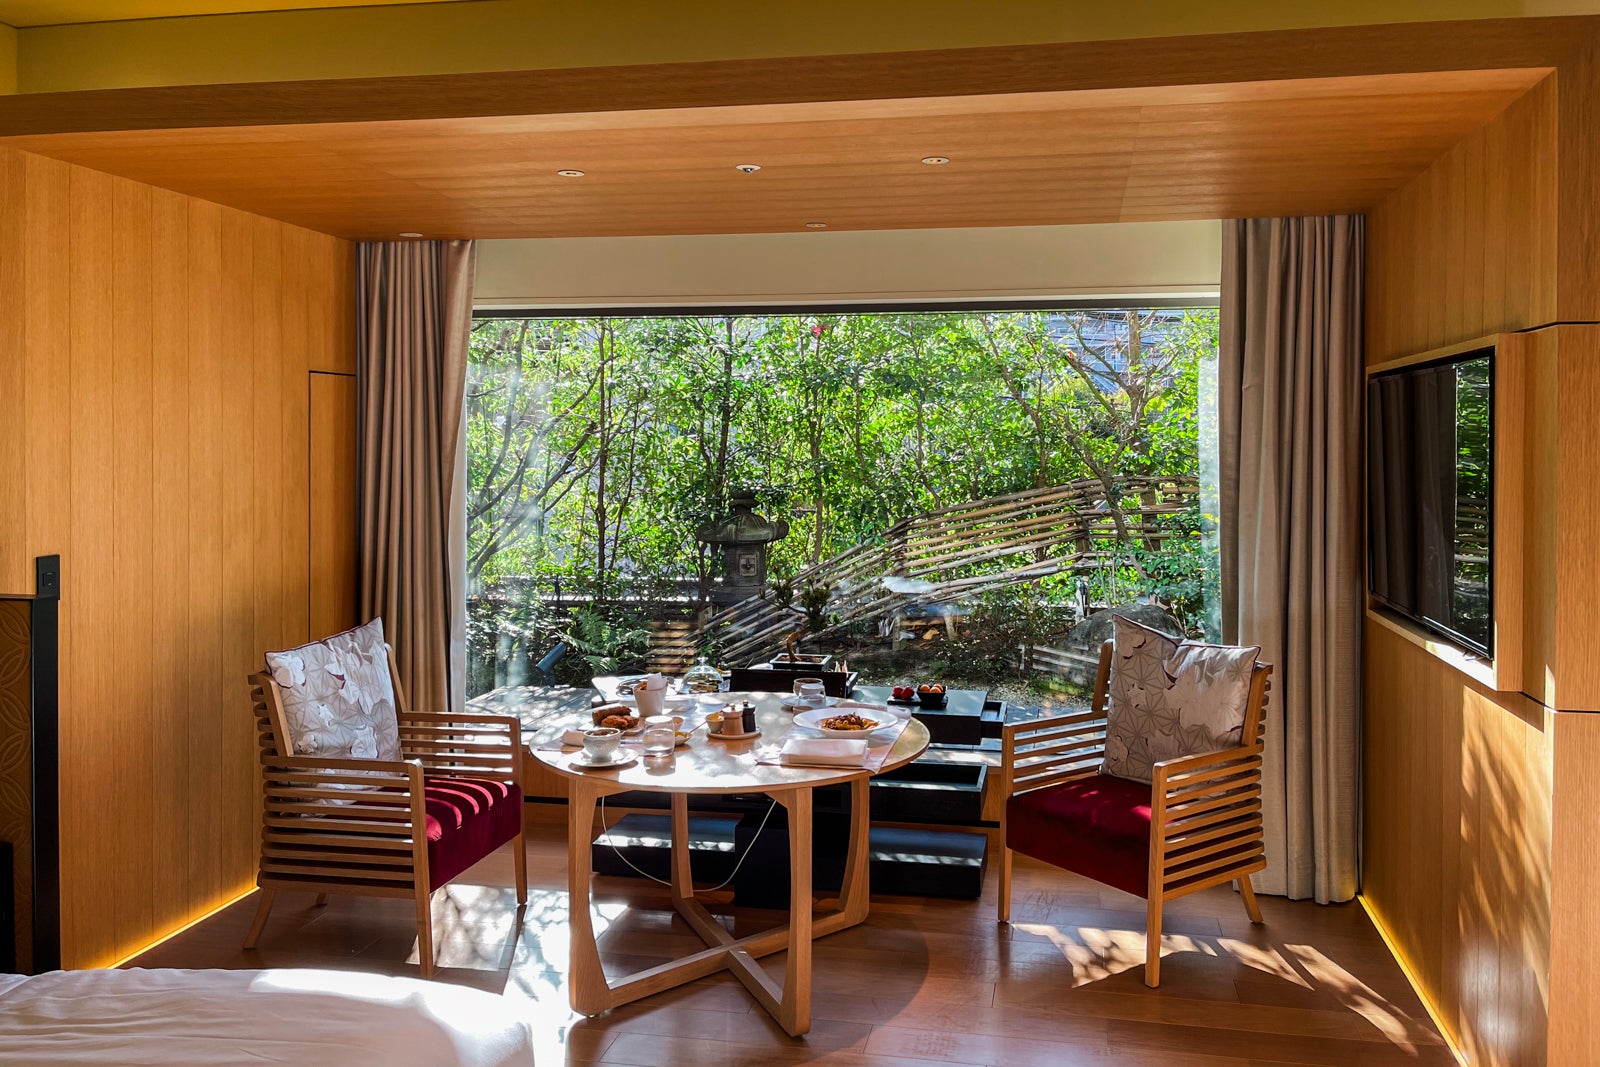 Garden-view room at The Ritz-Carlton, Kyoto in Japan